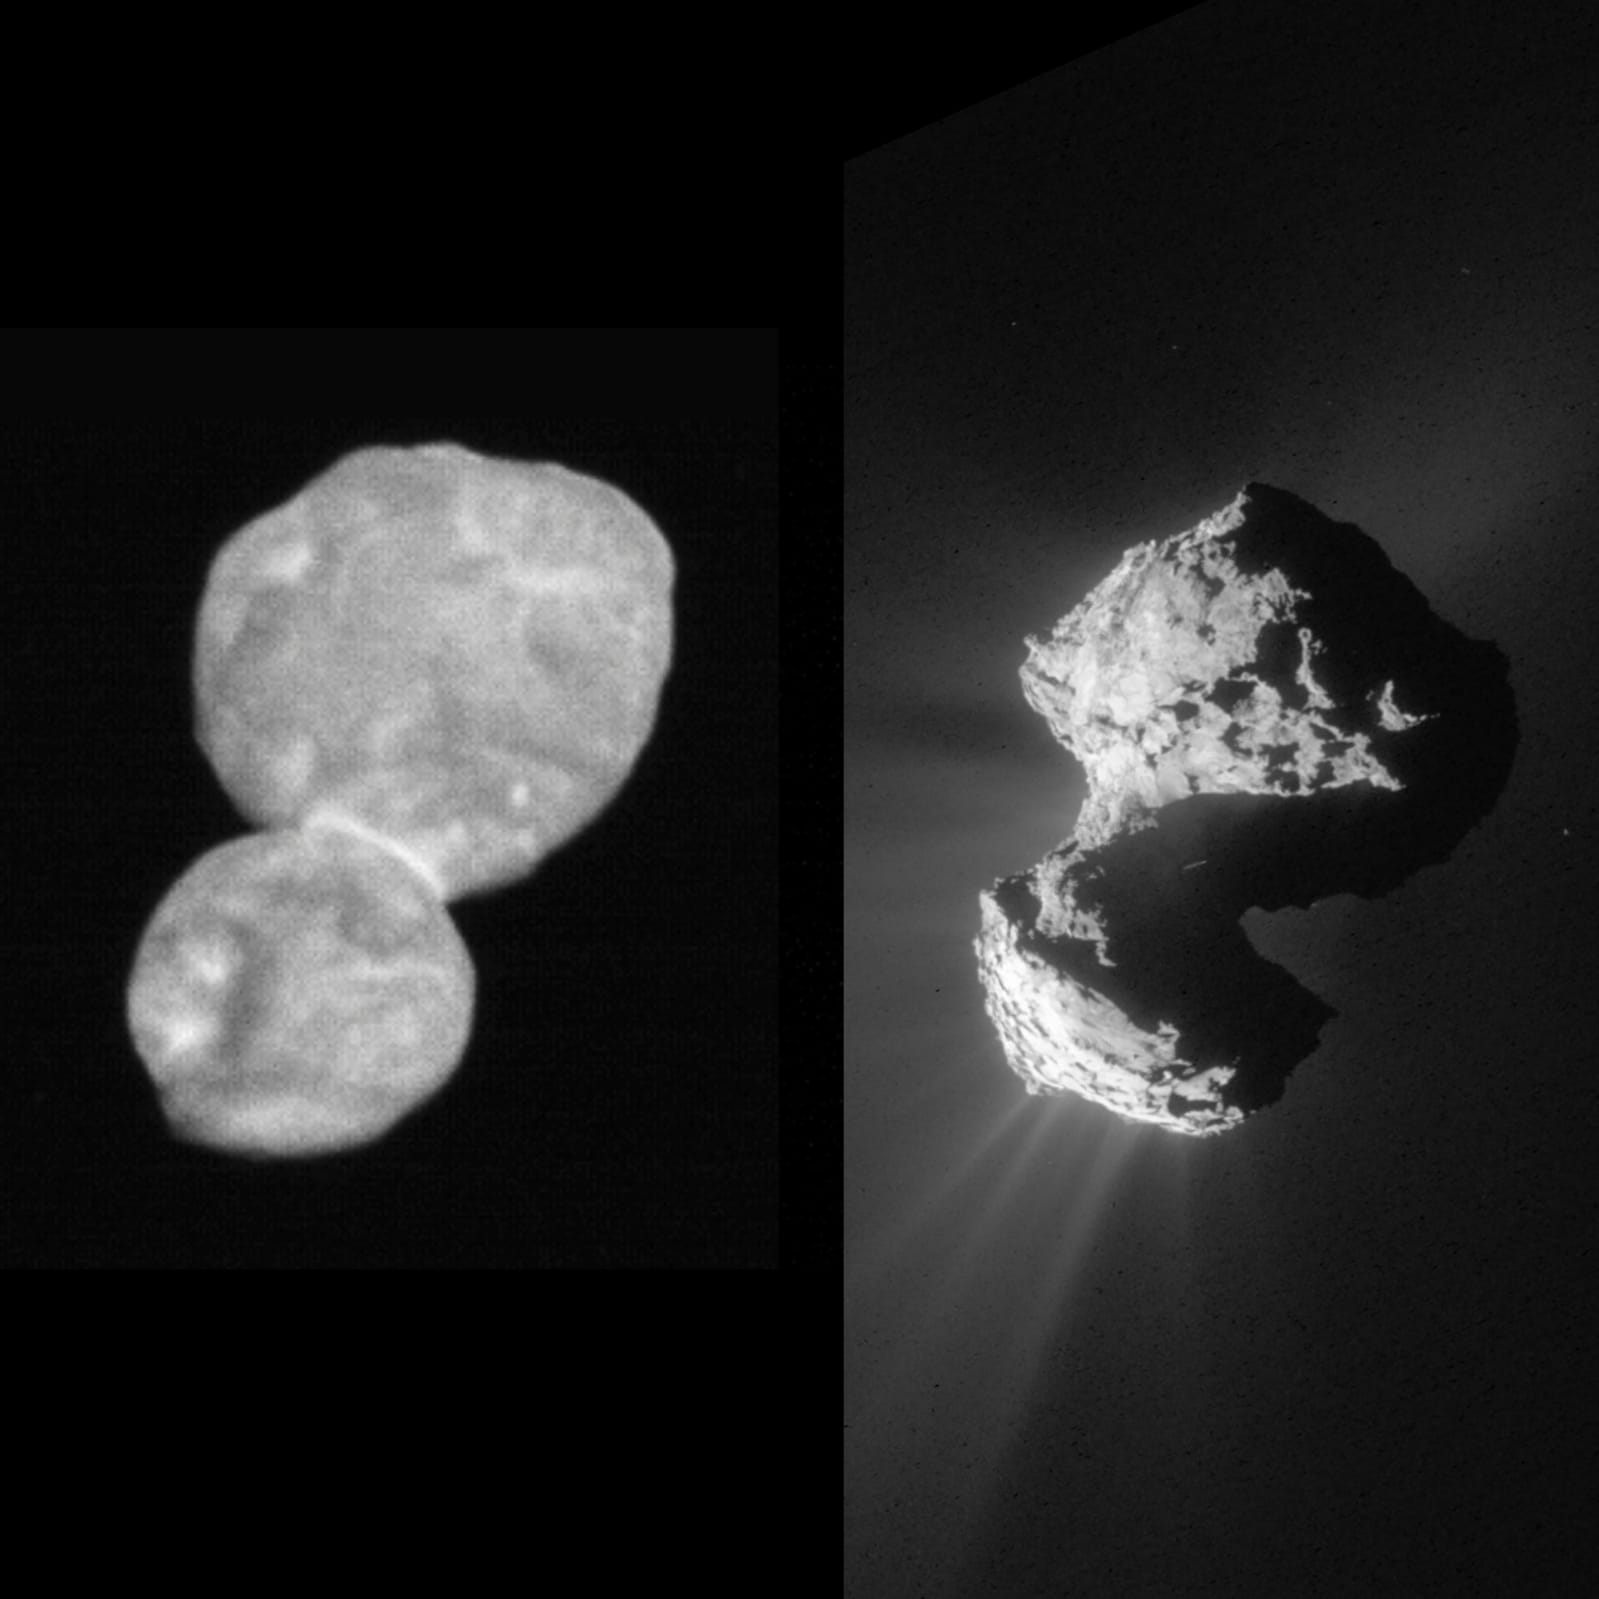 Comparison of smooth Kuiper Belt Object and battered comet.